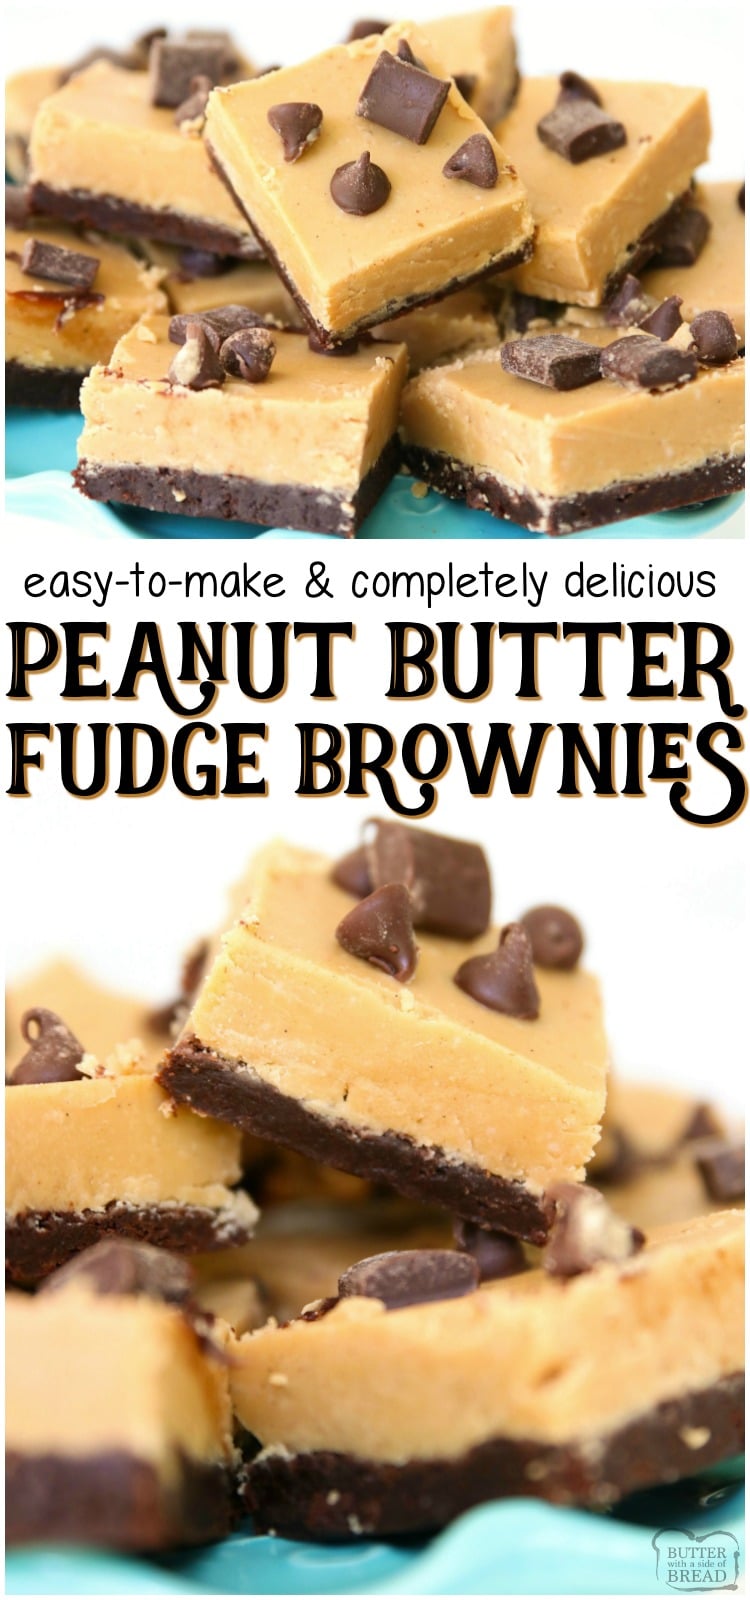 Peanut Butter Fudge Brownies made easy with 2 layers, a thin homemade brownie topped with smooth & creamy peanut butter fudge. Perfect chocolate peanut butter combination! #peanutbutter #fudge #brownies #baking #dessert #recipe from BUTTER WITH A SIDE OF BREAD